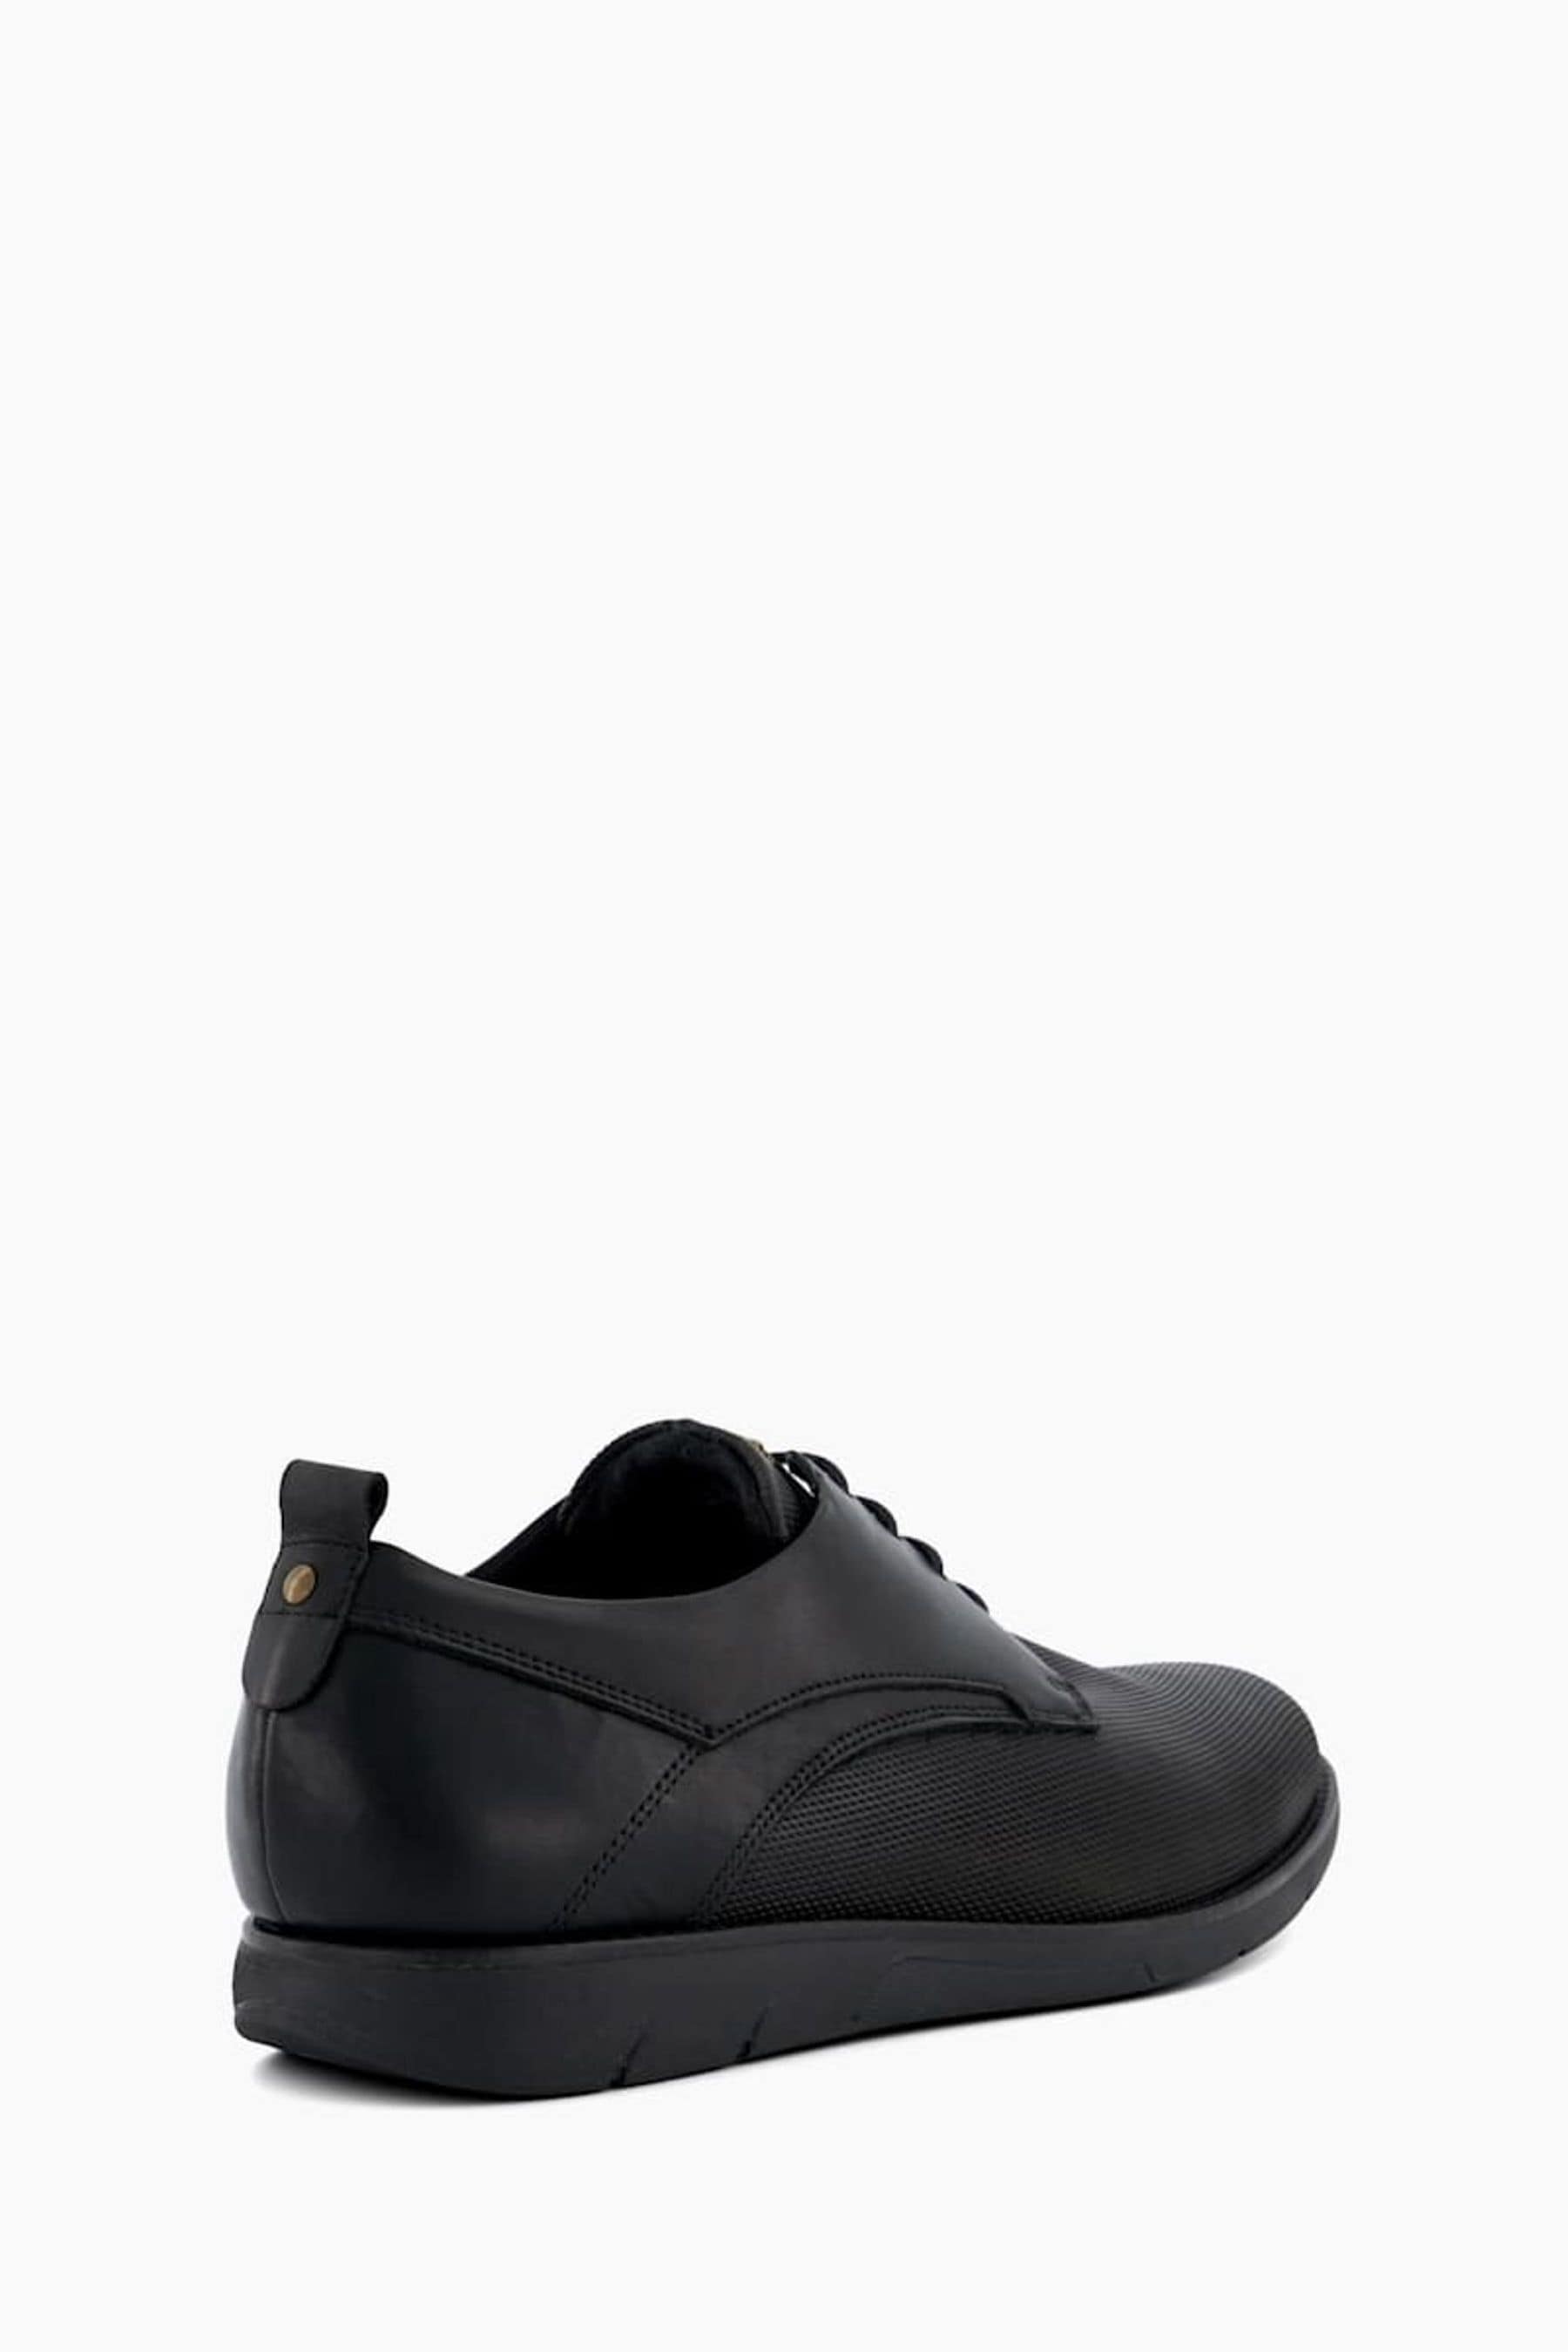 Buy Dune London Barnabey Punched Plain Derby Beige Shoes from the Next ...